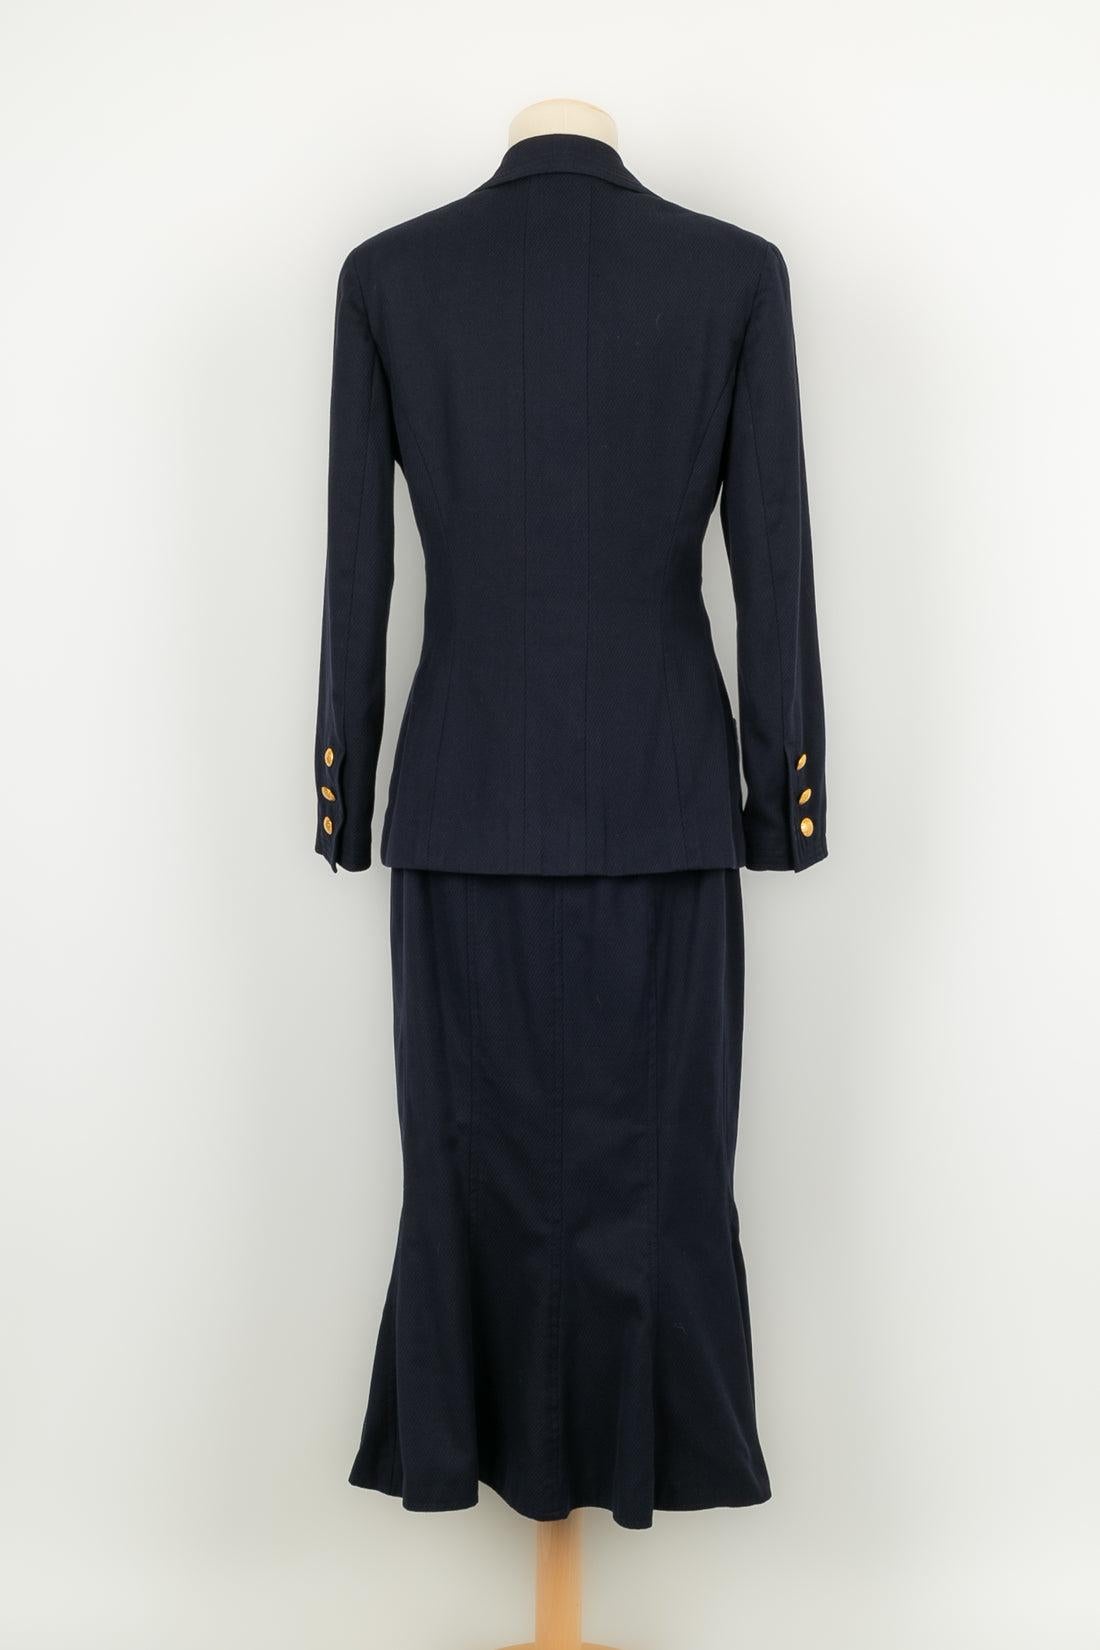 Black Chanel Jewel Jacket and a Long Skirt Outfit Spring, 1993 For Sale